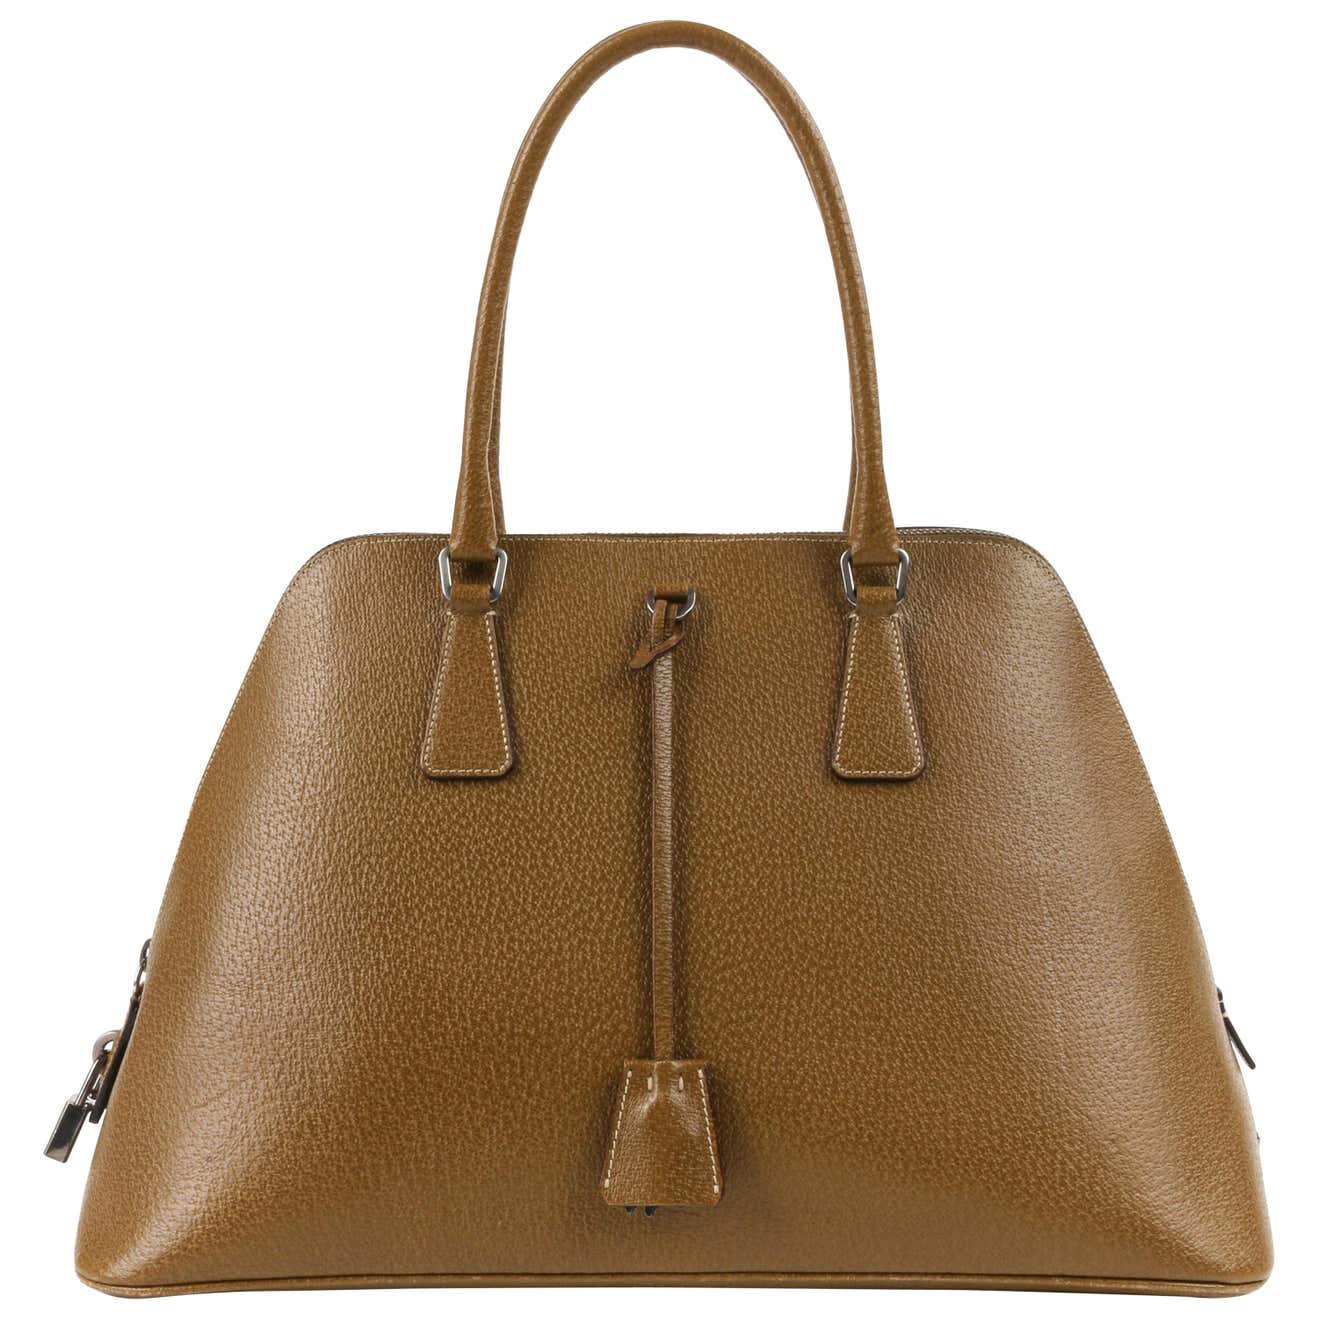 PRADA Olive Brown Leather Structured Top Handle Trapezoid Satchel Purse ...